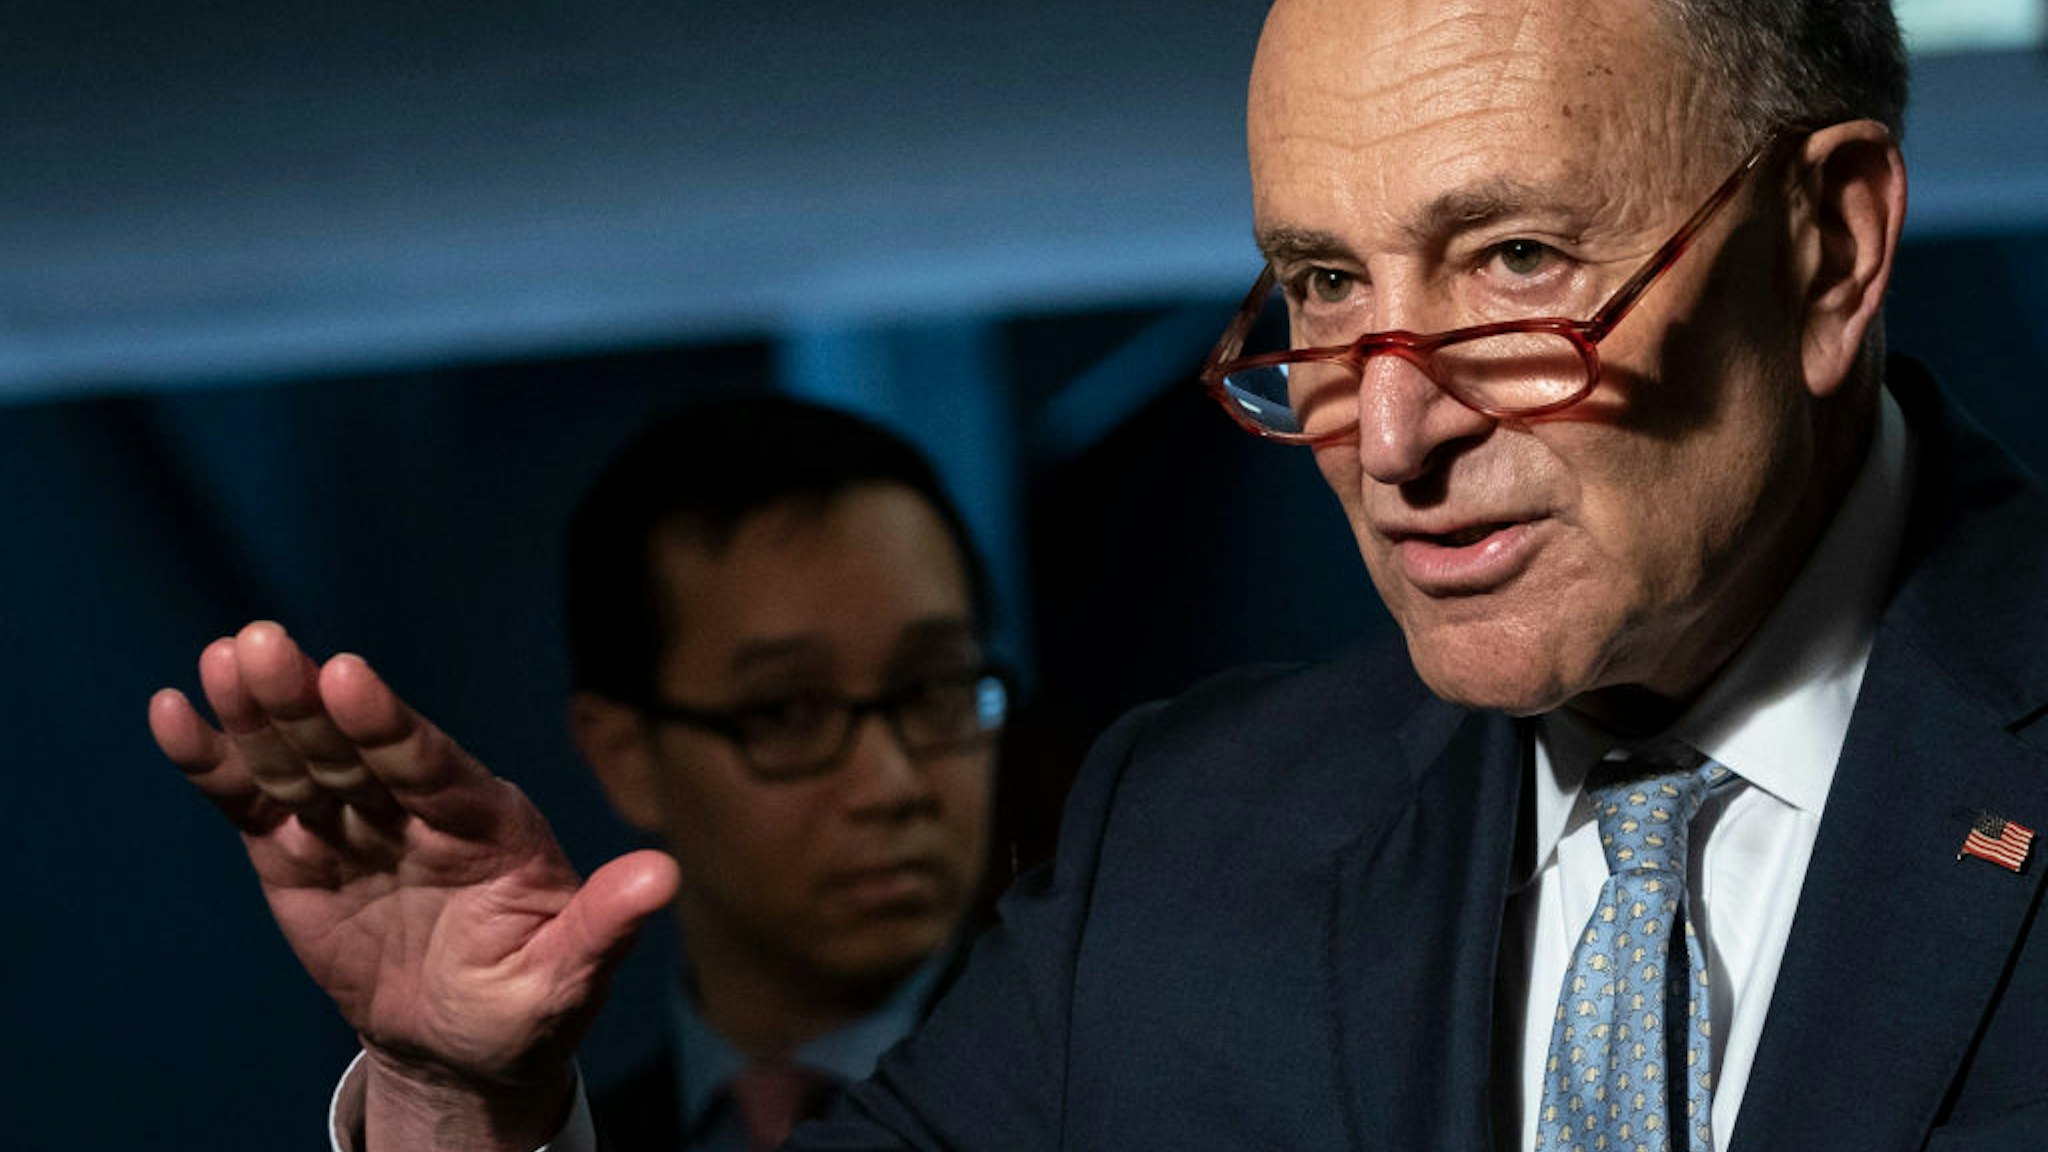 Senate Minority Leader Chuck Schumer (D-NY) speaks to reporters before a meeting with a select group of Senate Republicans, Senate Democrats, and Trump administration officials in the Hart Senate Office Building on Capitol Hill March 20, 2020 in Washington, DC.